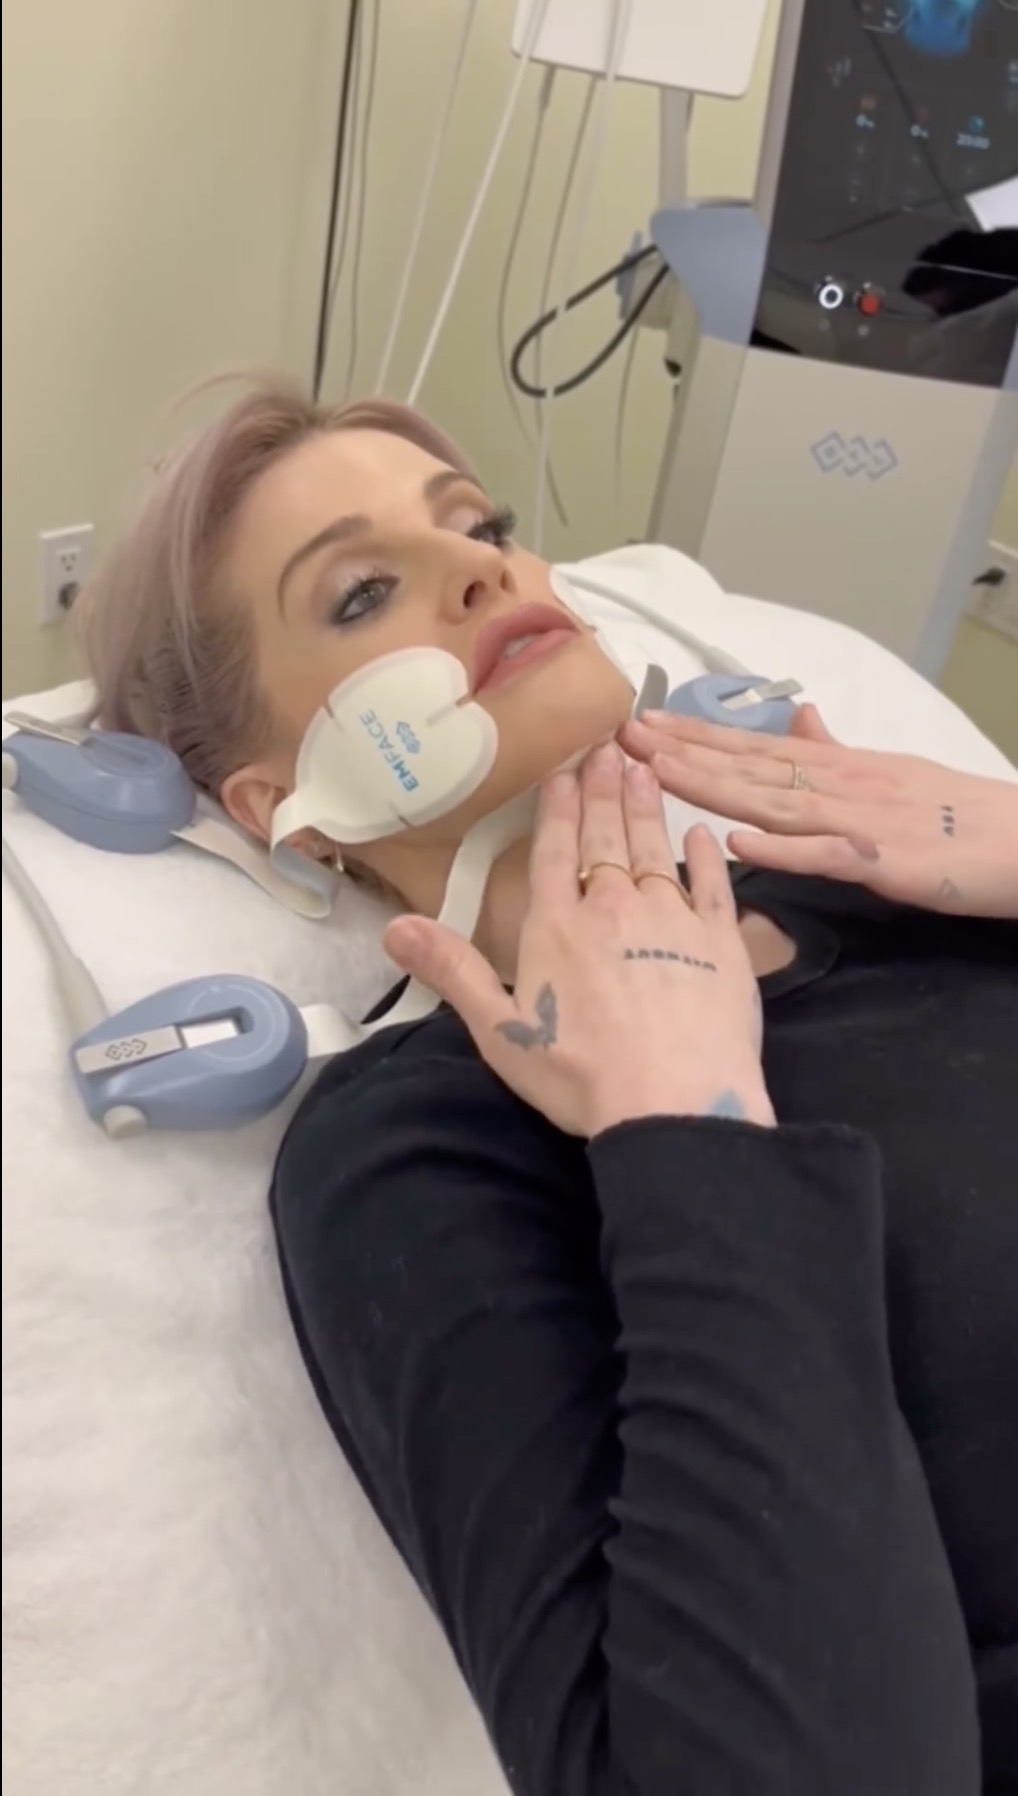 The reality star had a face and body sculpting treatment earlier this week